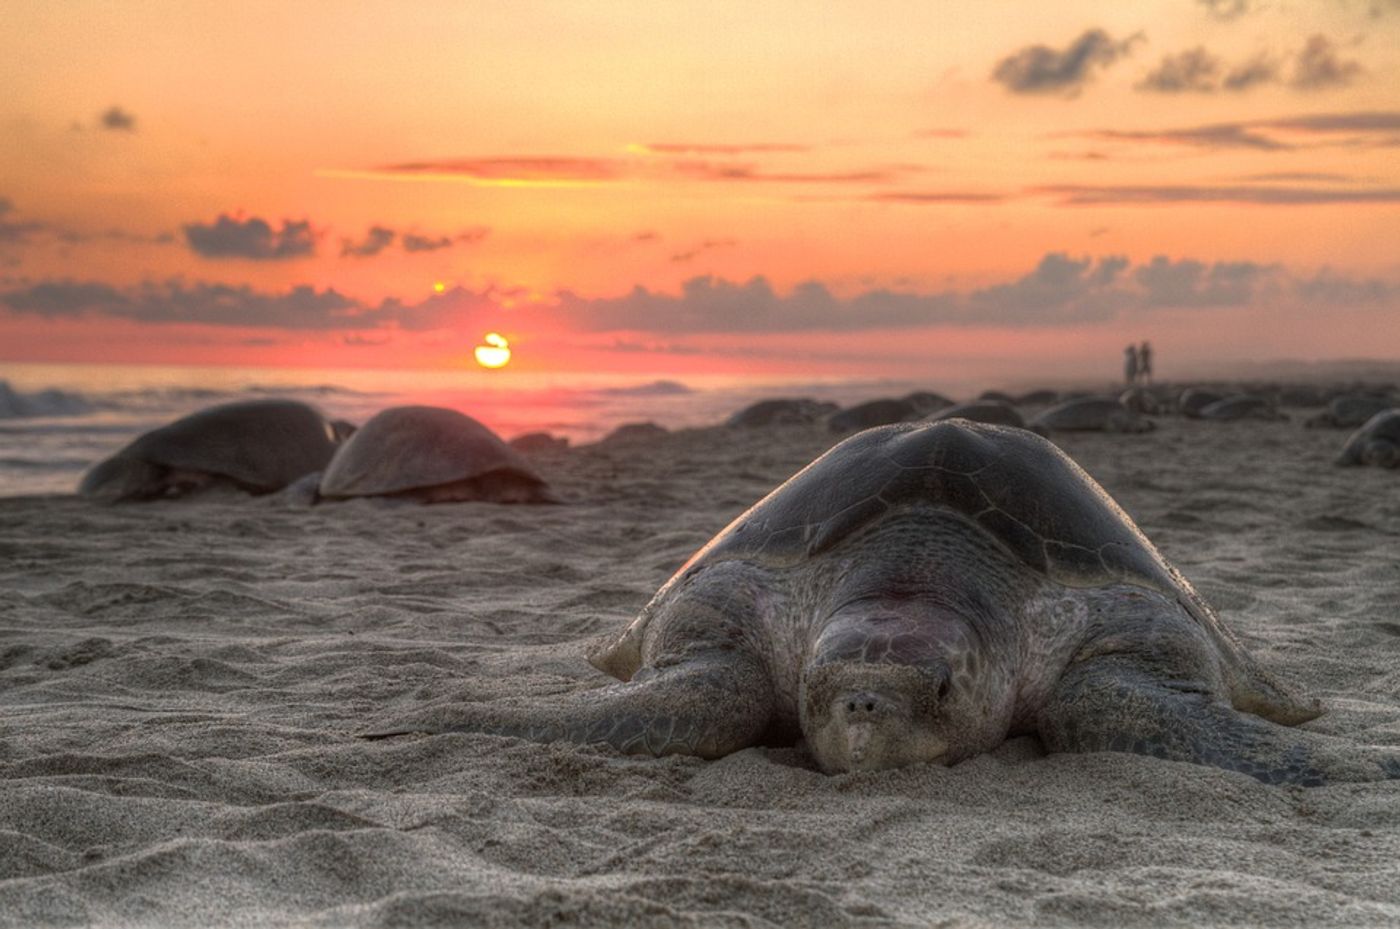 Many sea turtles are endangered animals, but volunteers are doing their best to protect stranded animals following a tsunami strike in Indonesia.